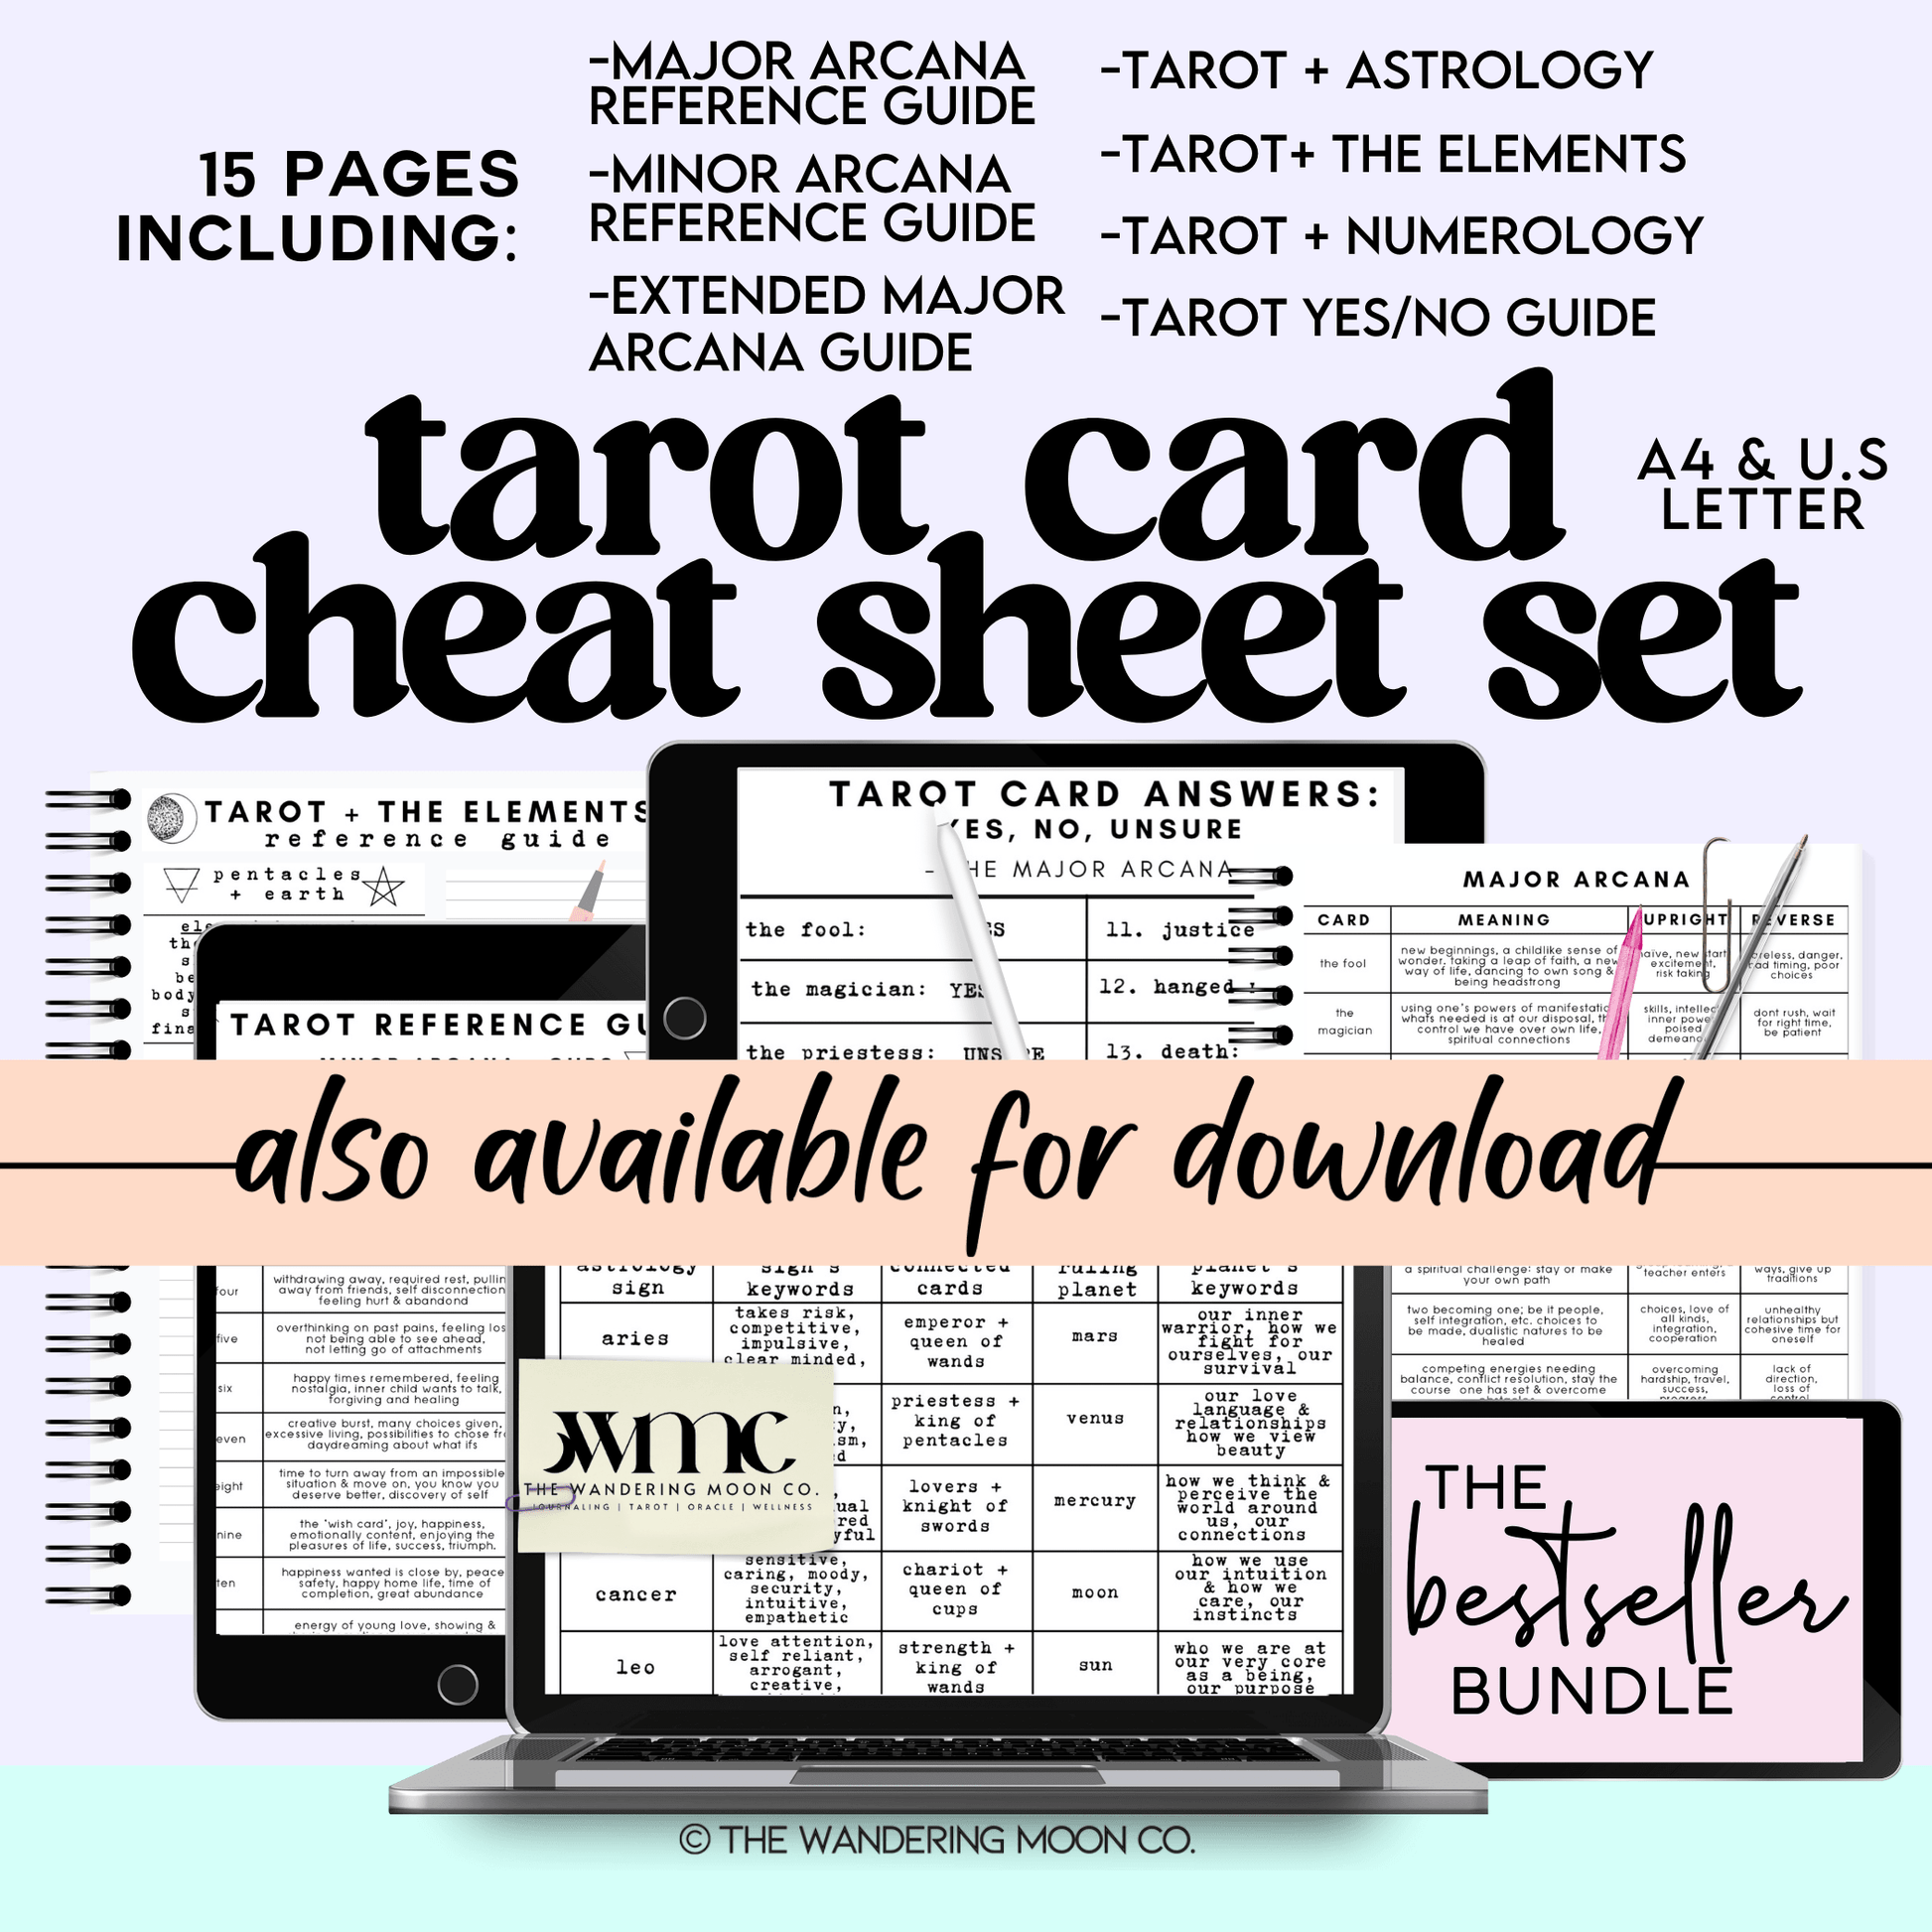 tarot card divination cheat sheet: the aces in tarot - digital download - The Wandering Moon Co.